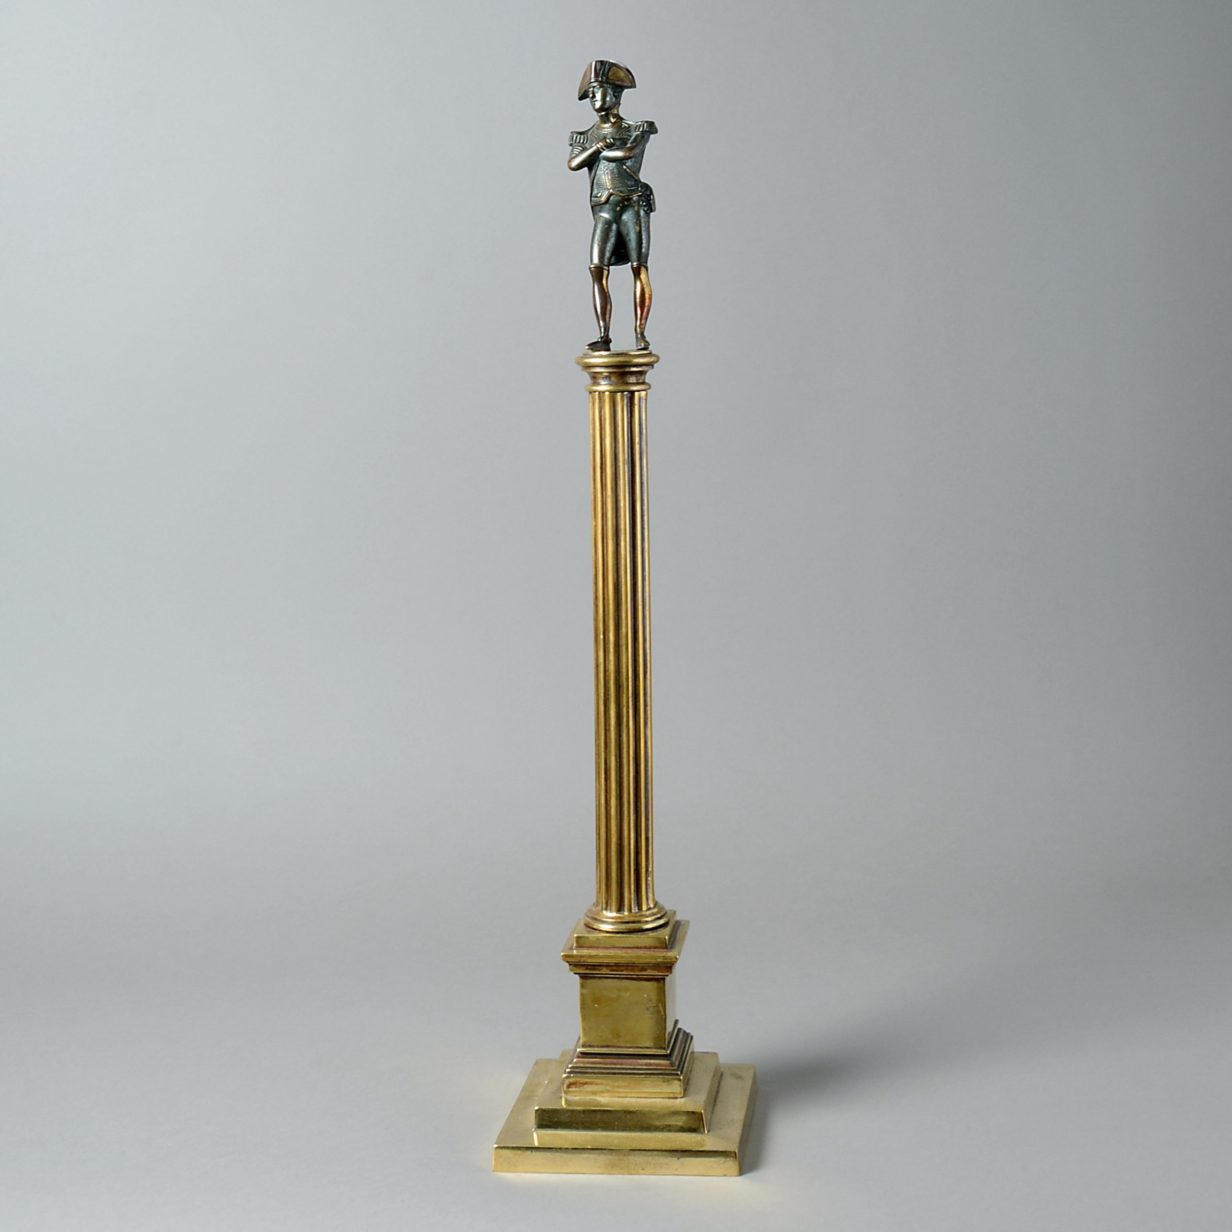 A 19th century steel statuette of napoleon set upon a brass column